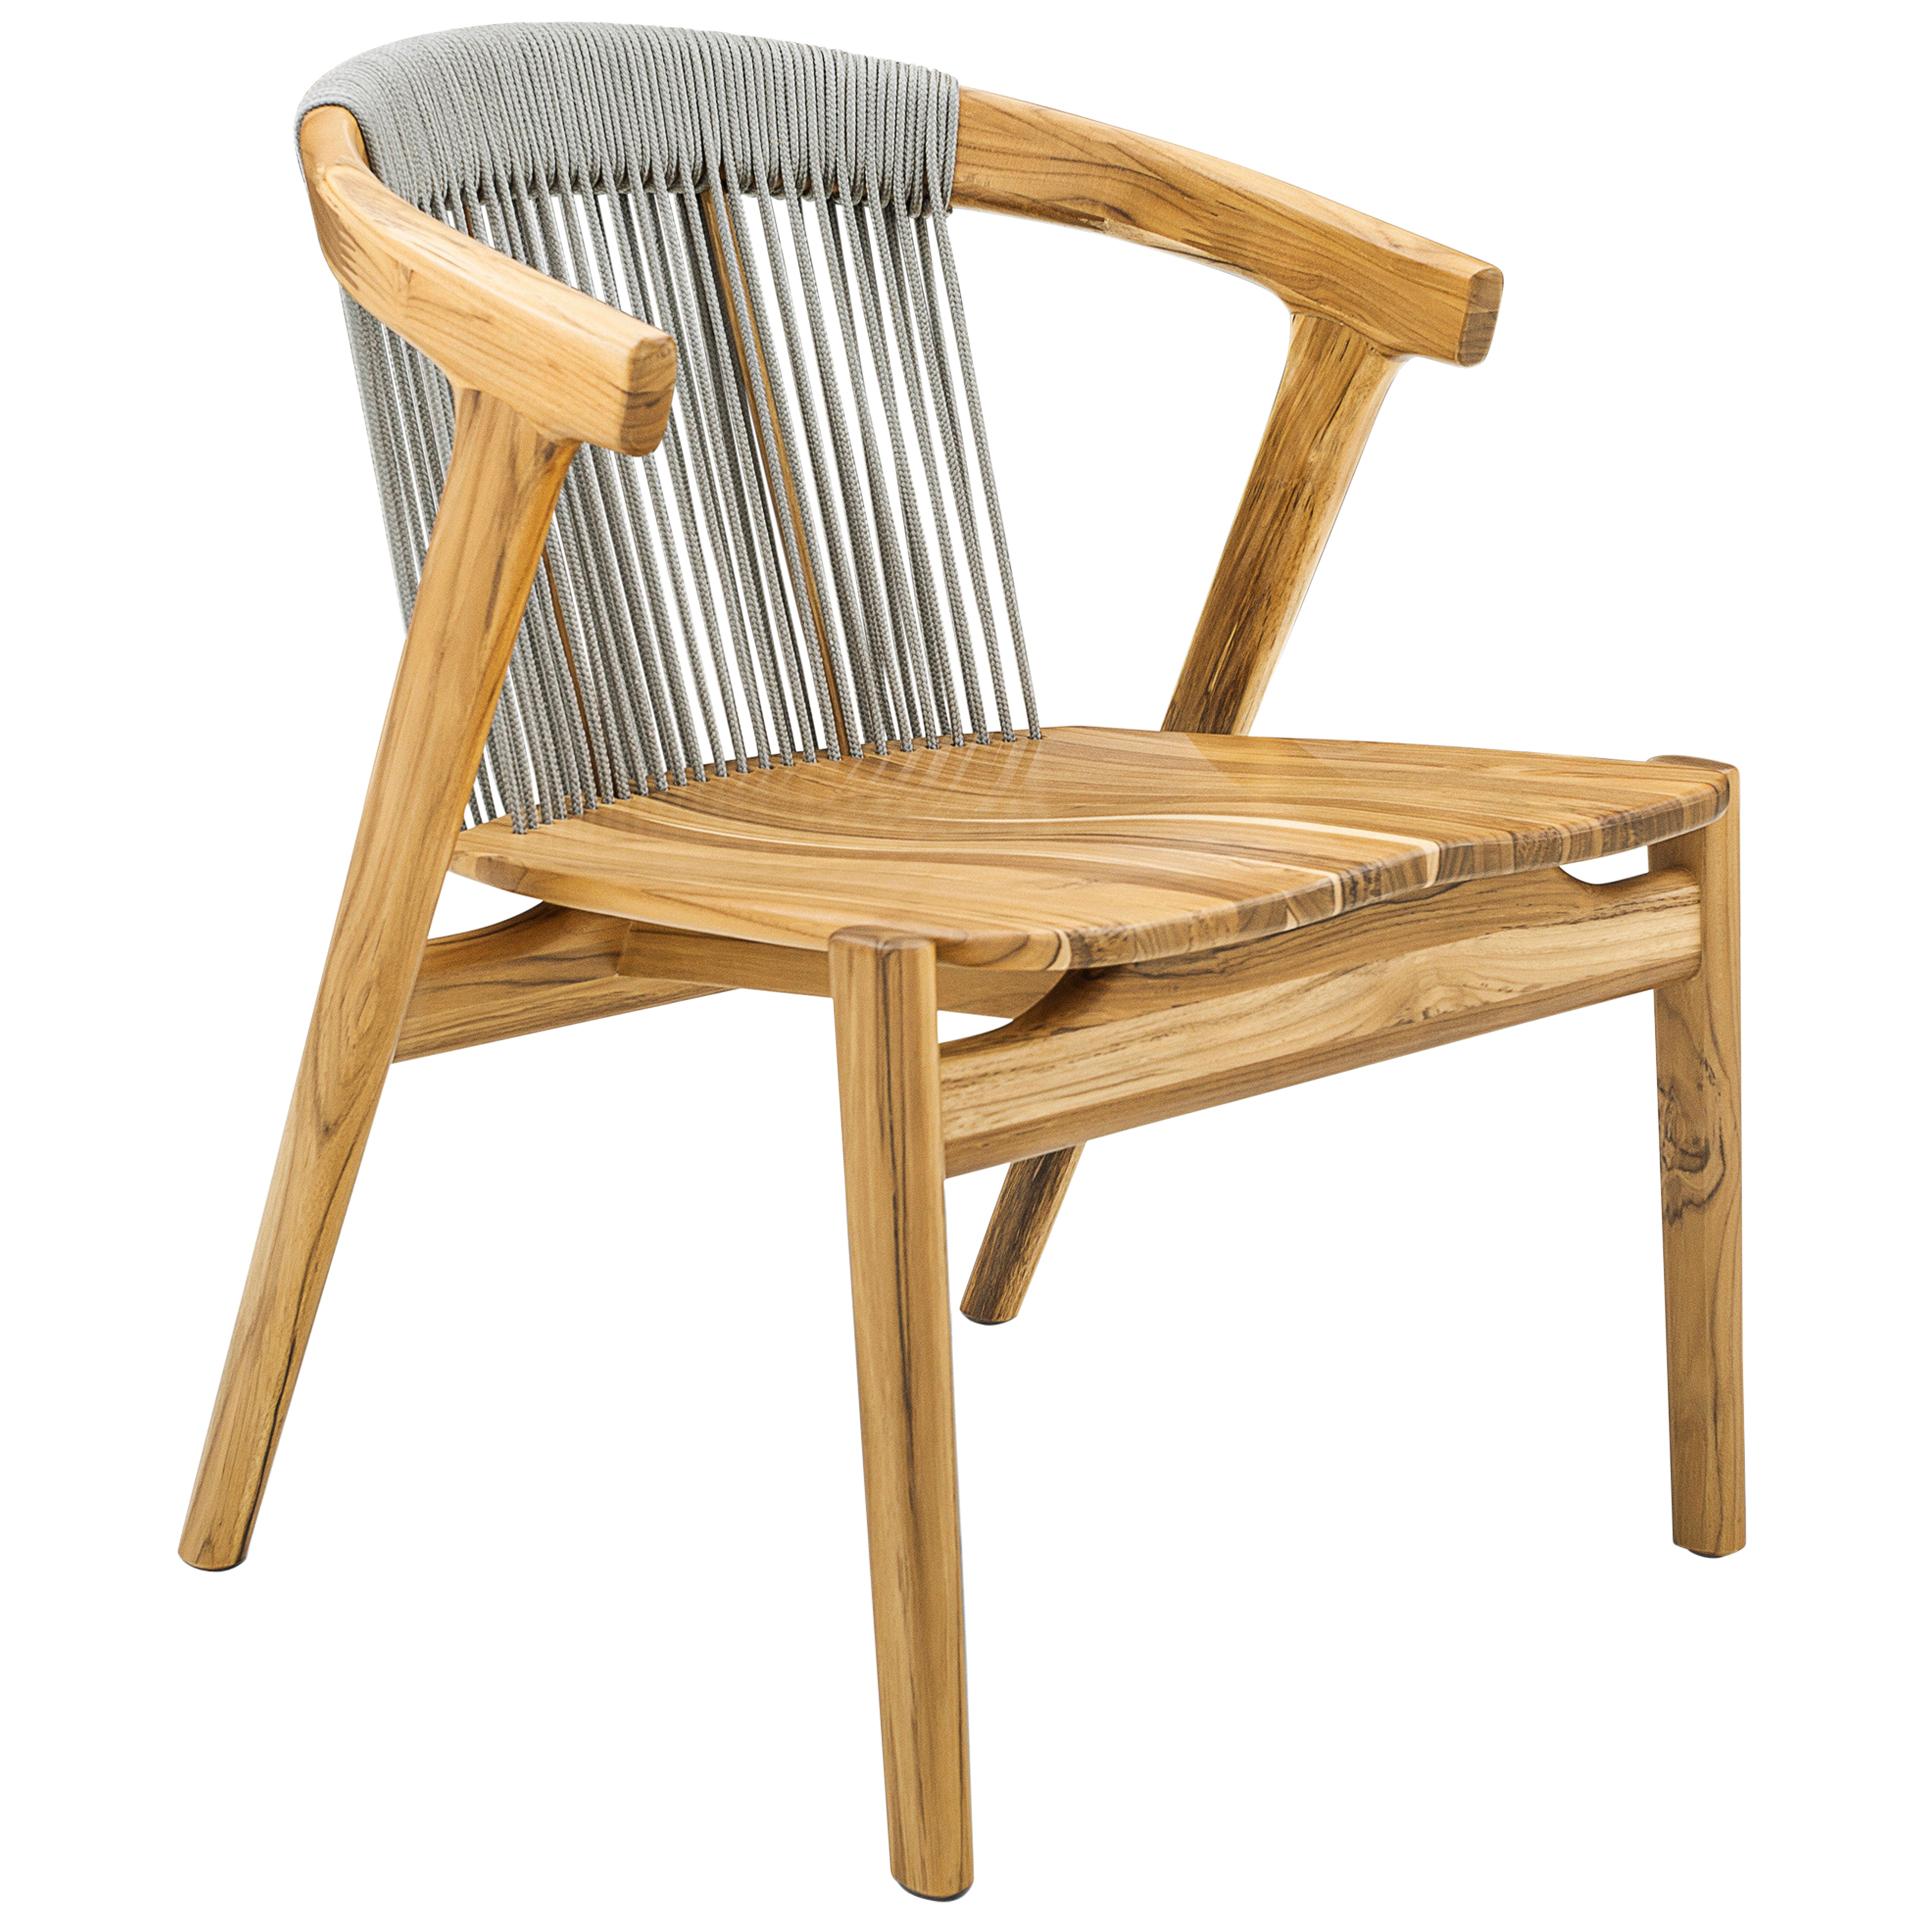 Vine Outdoor Dining Chair in Teak Wood with Silver Rope For Sale